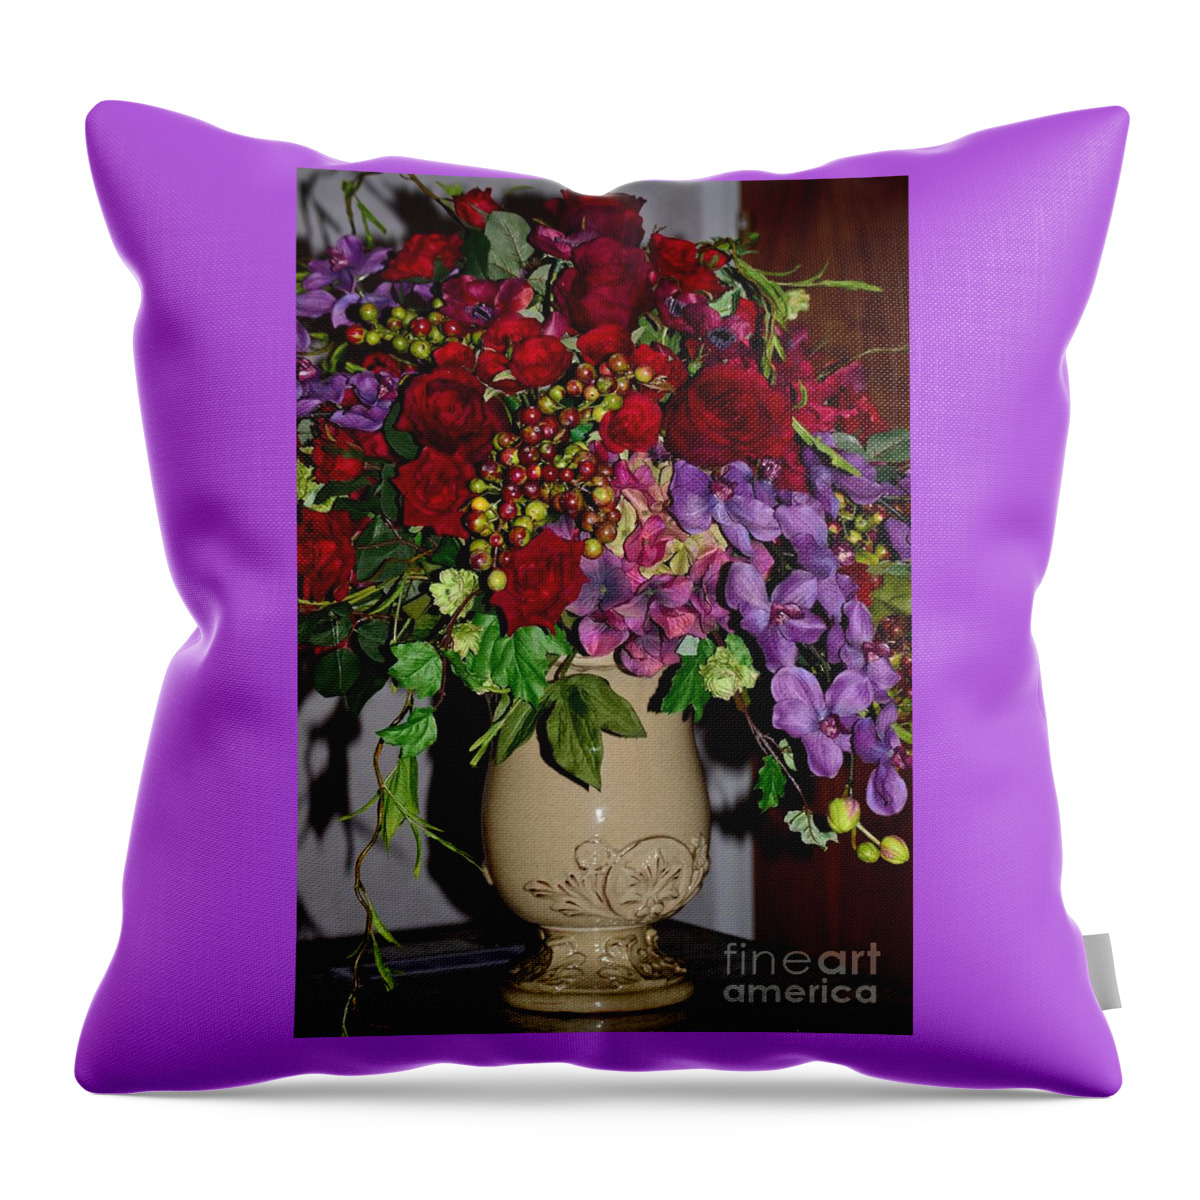 Flower Throw Pillow featuring the photograph Floral Decor by Kathleen Struckle